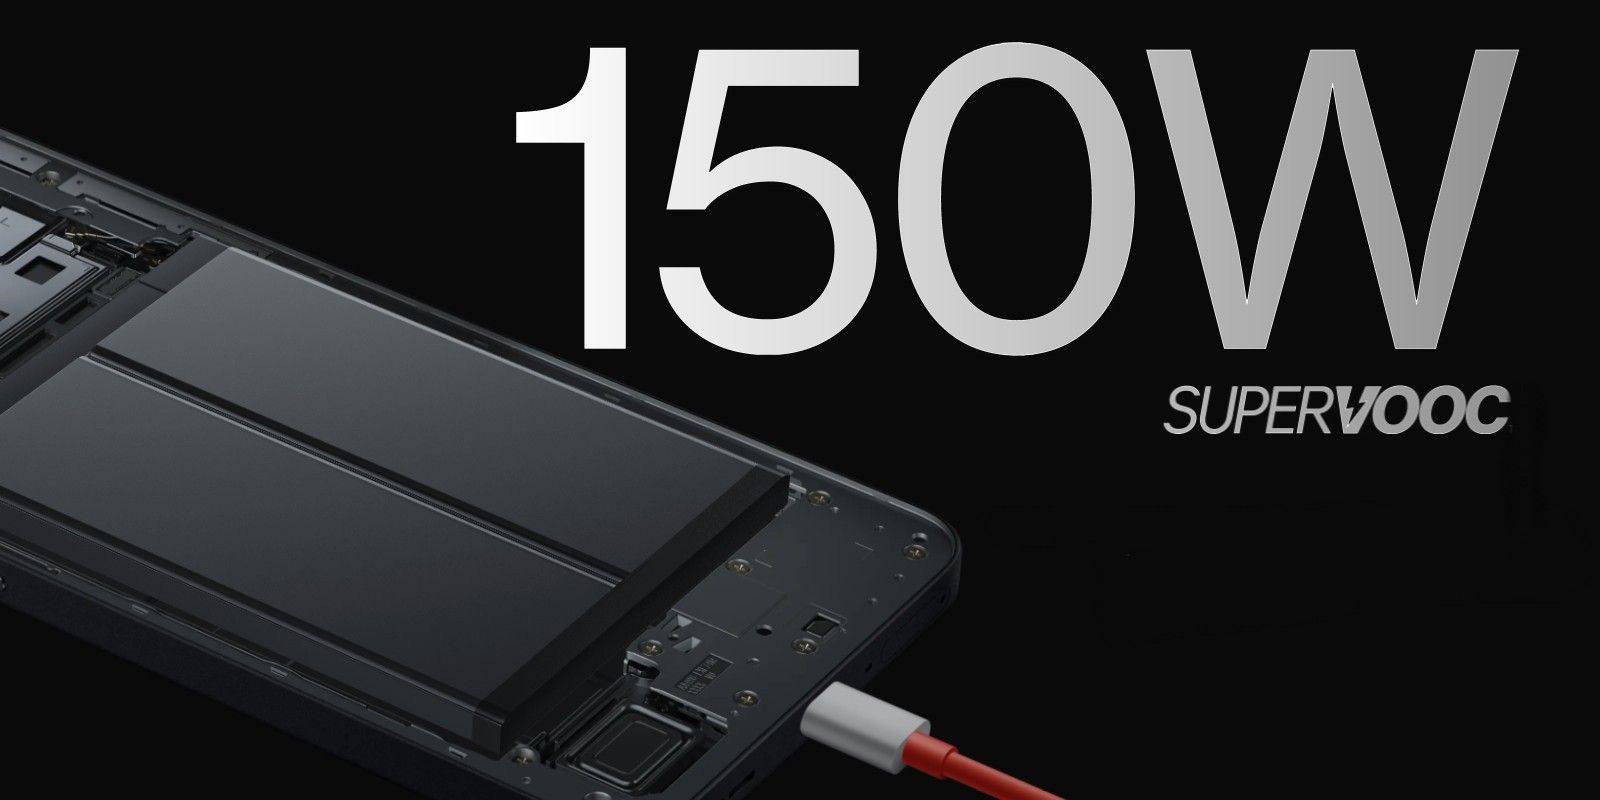 The OnePlus 10 will reportedly support 150W fast charging